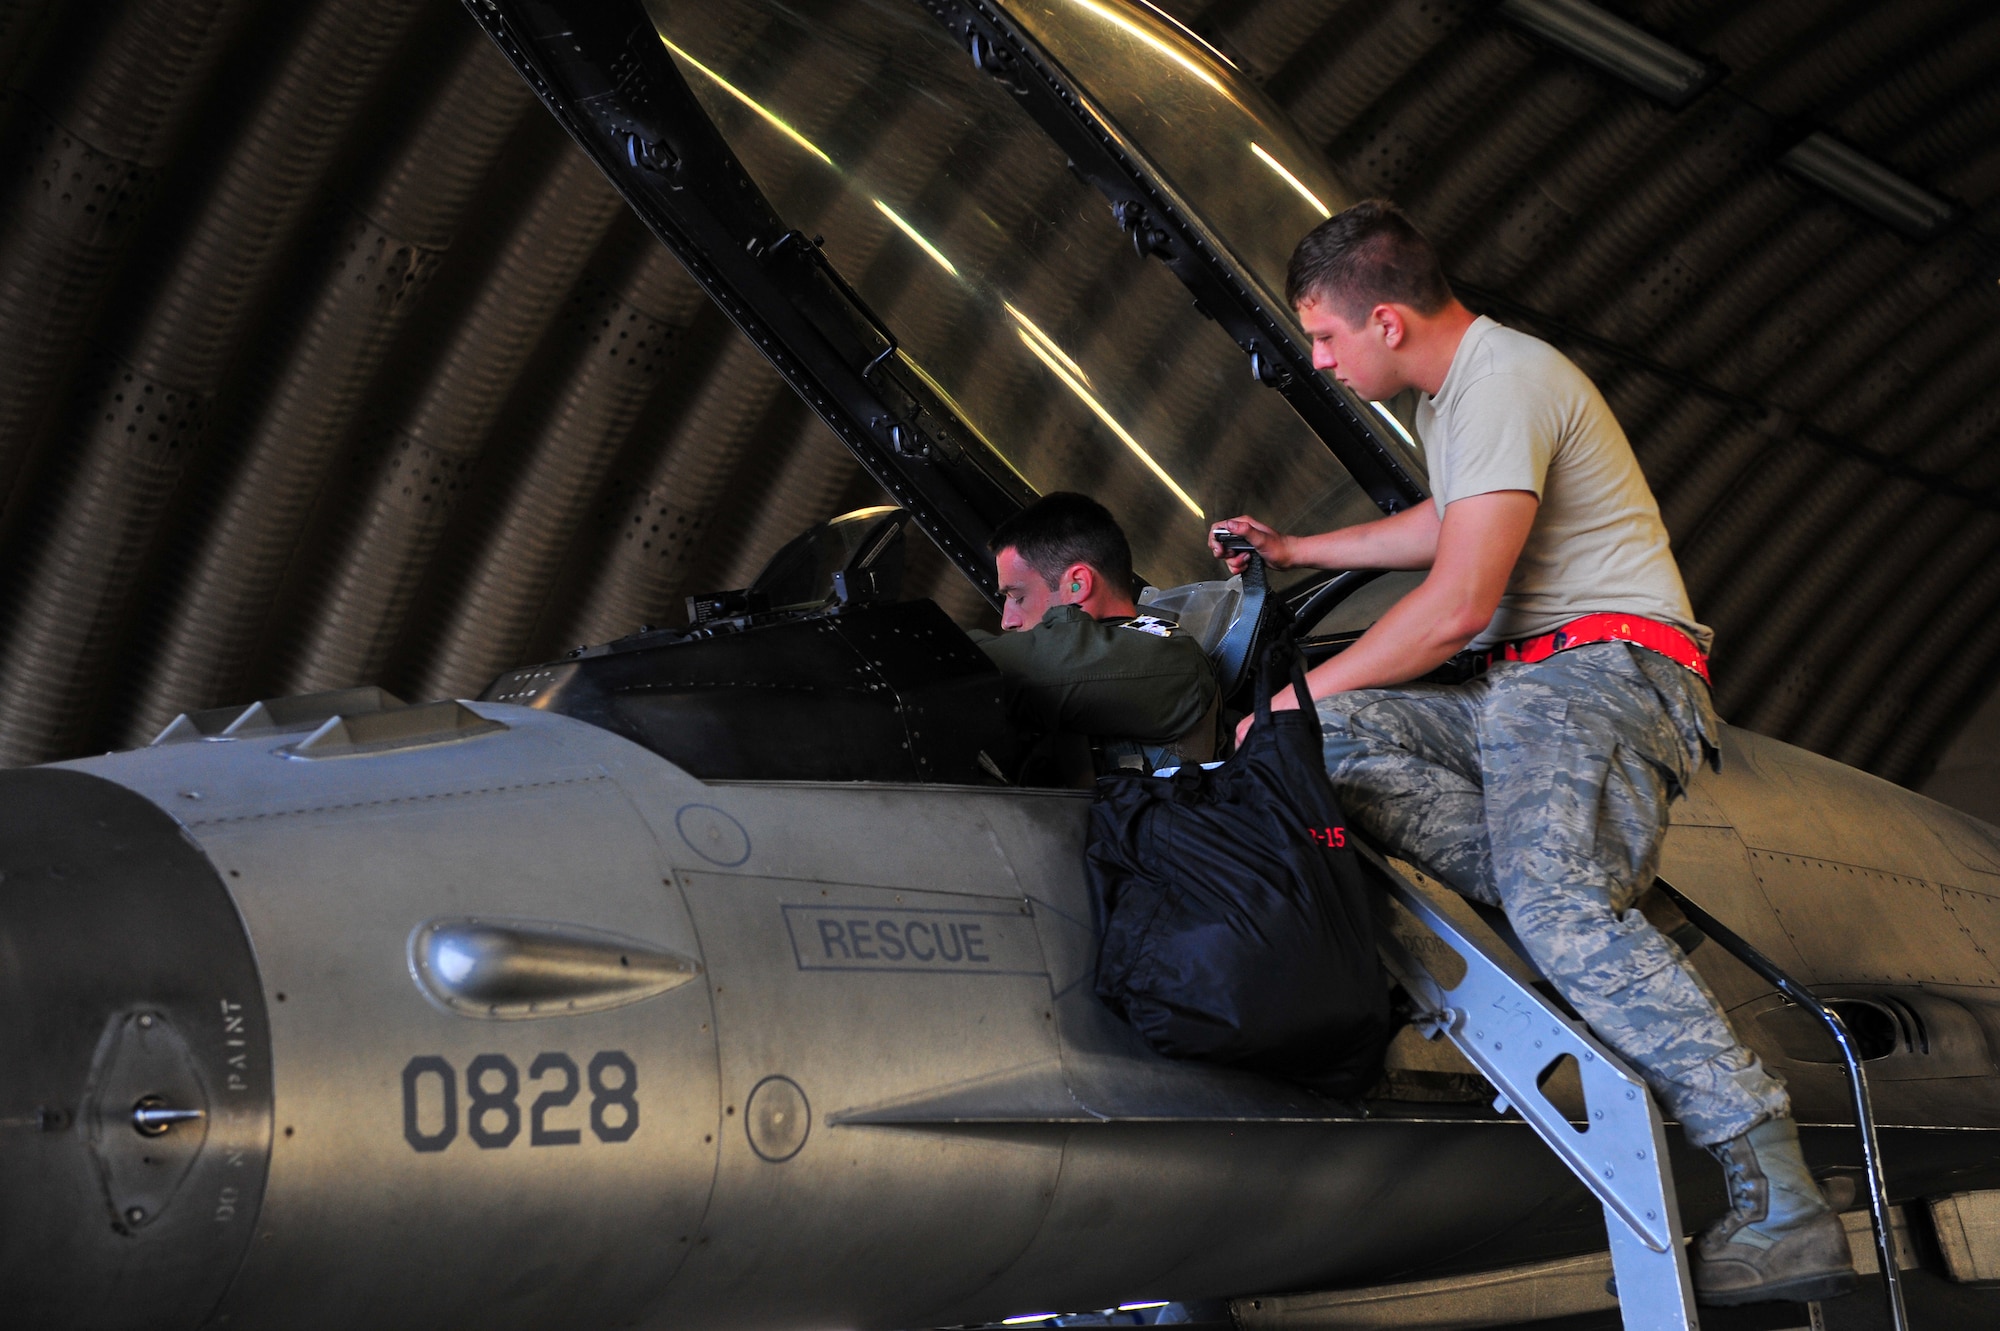 SPANGDAHLEM AIR BASE, Germany – Airman 1st Class Andrey Vasilchuk, 480th Aircraft Maintenance Unit crew chief, helps Capt. Matthew Clayton, 480th Fighter Squadron pilot, get secured into the cockpit of an F-16 Fighting Falcon on the flight line here Aug. 23 before departing for Nordic Air Meet 2012. The fighter squadron departed for the multi-national training exercise to share and exchange new combat tactics with allied countries. (U.S. Air Force photo by Airman 1st Class Dillon Davis/Released)